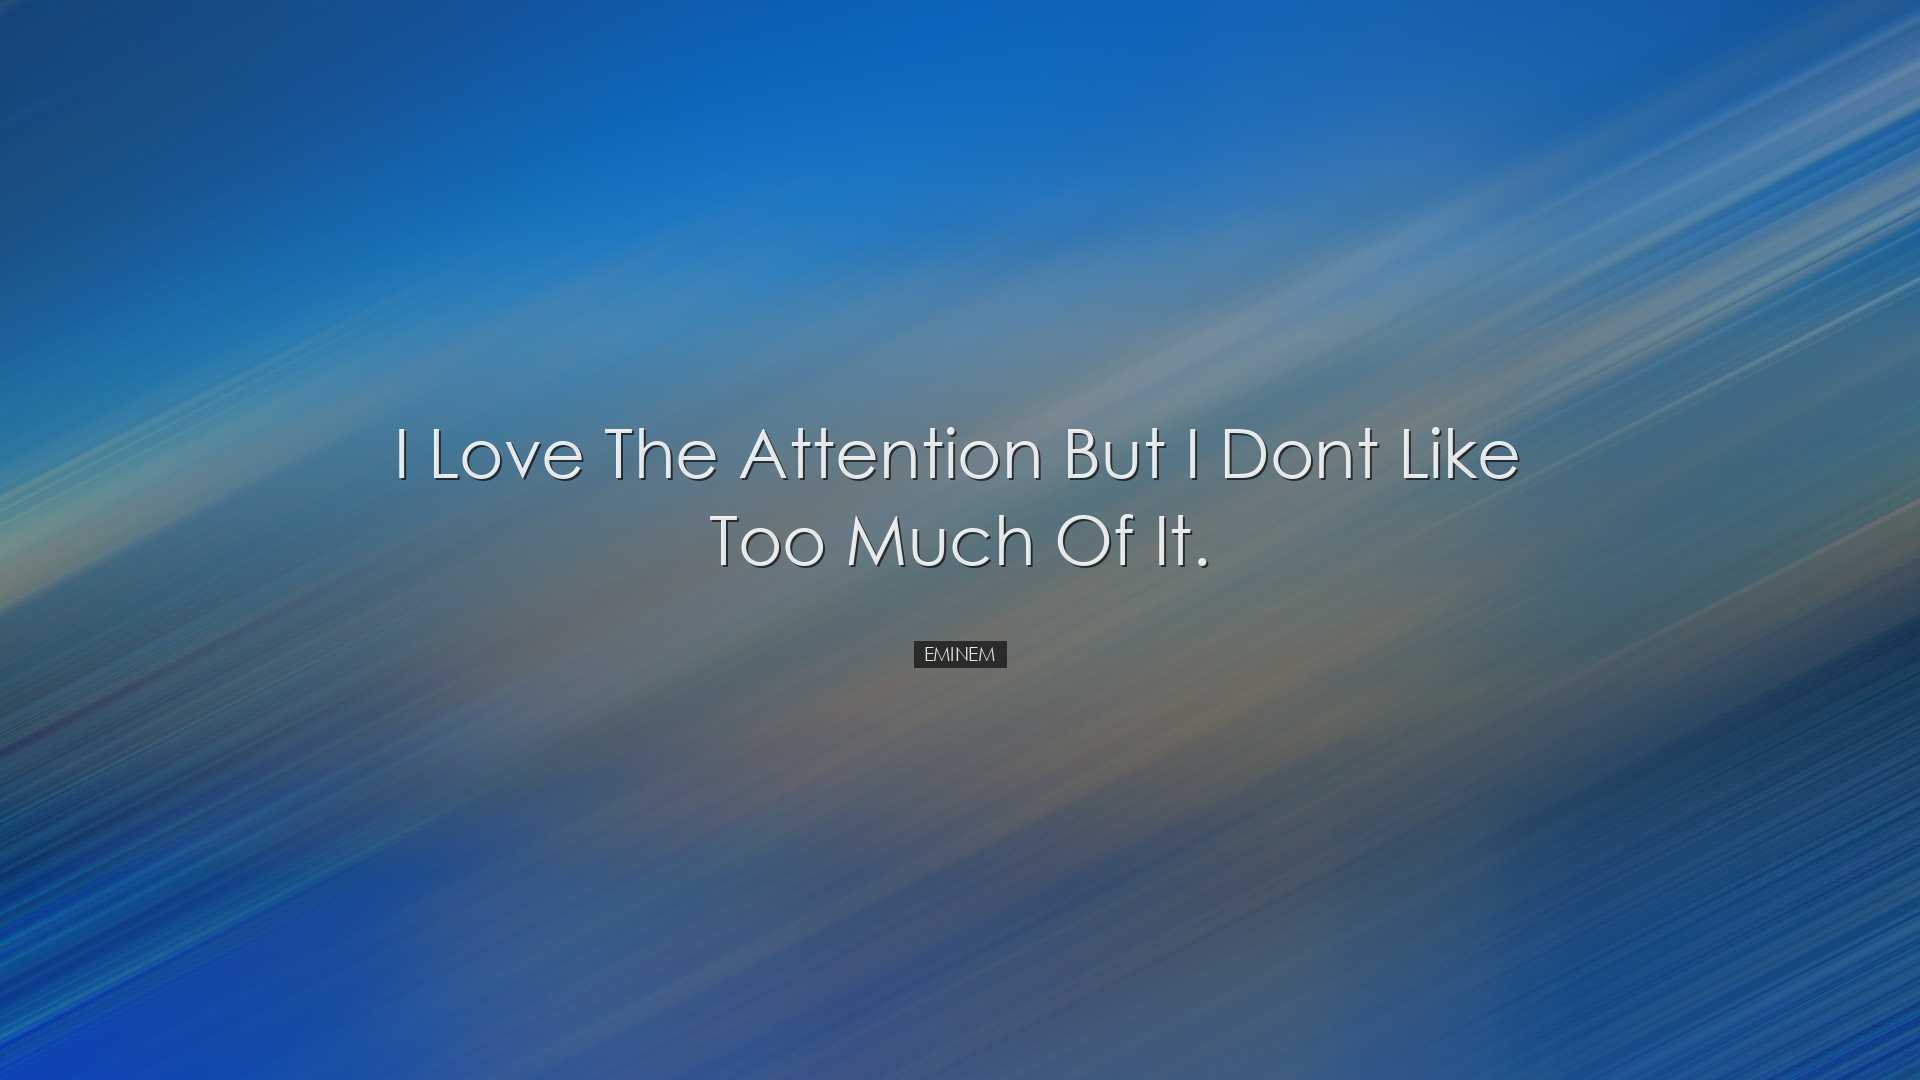 I love the attention but I dont like too much of it. - Eminem